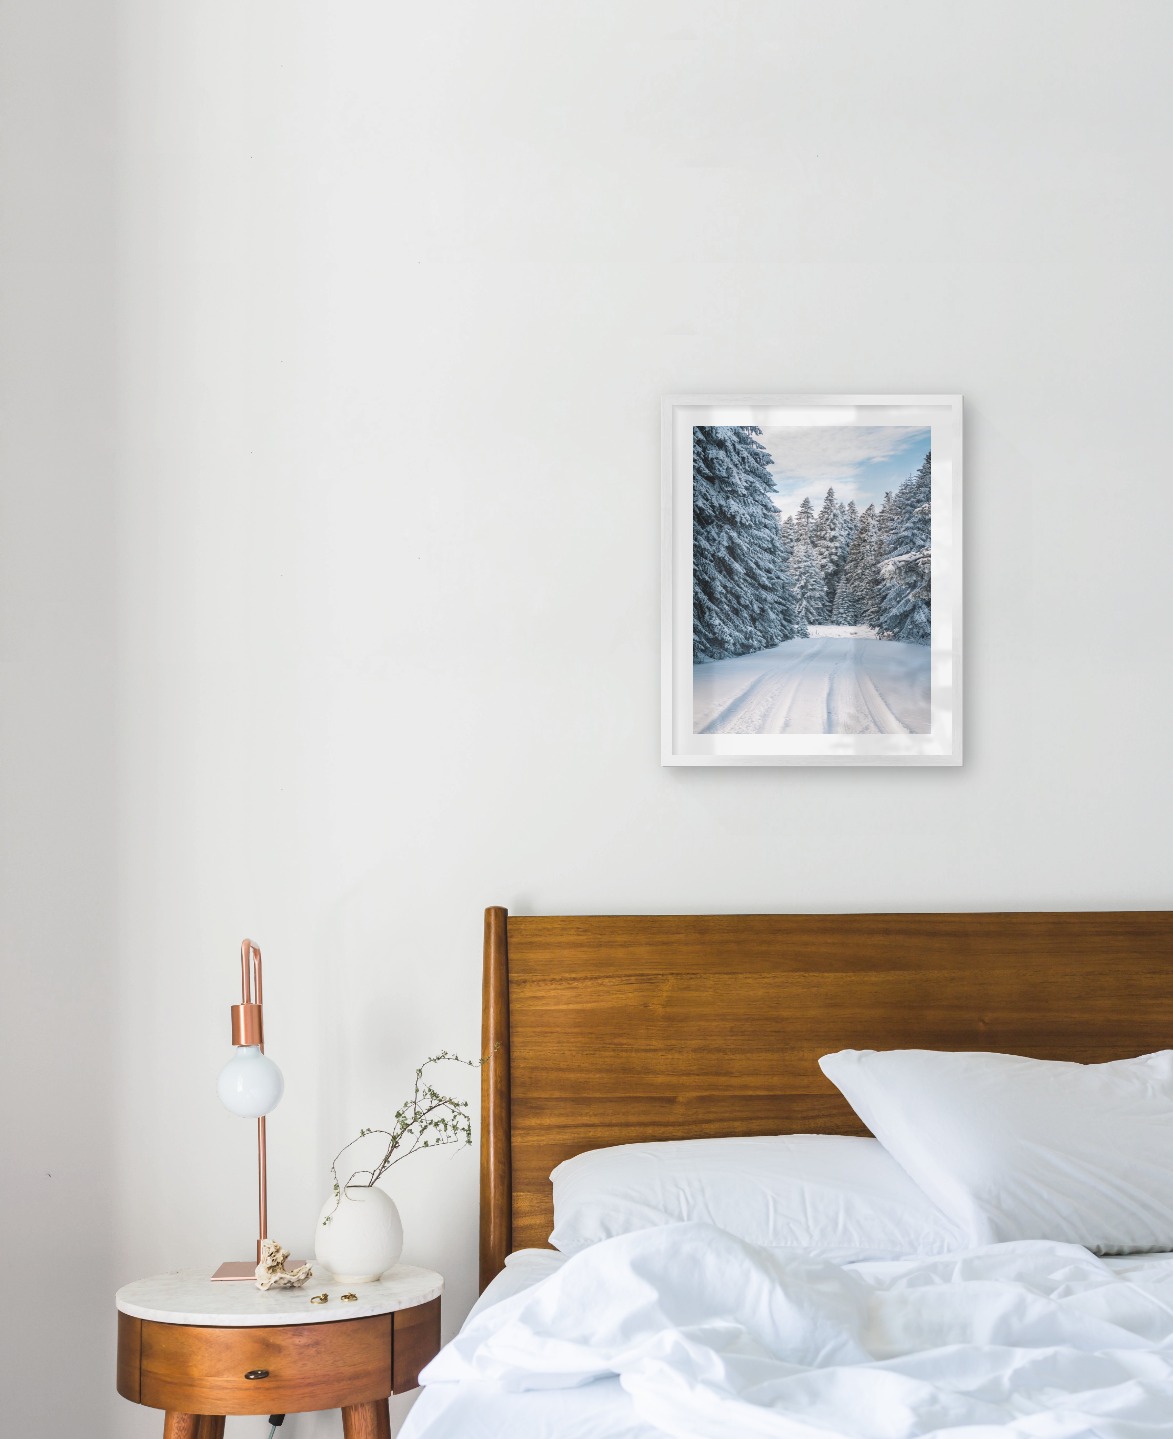 Gallery wall with picture frame in silver in size 40x50 with print "Snowy road"